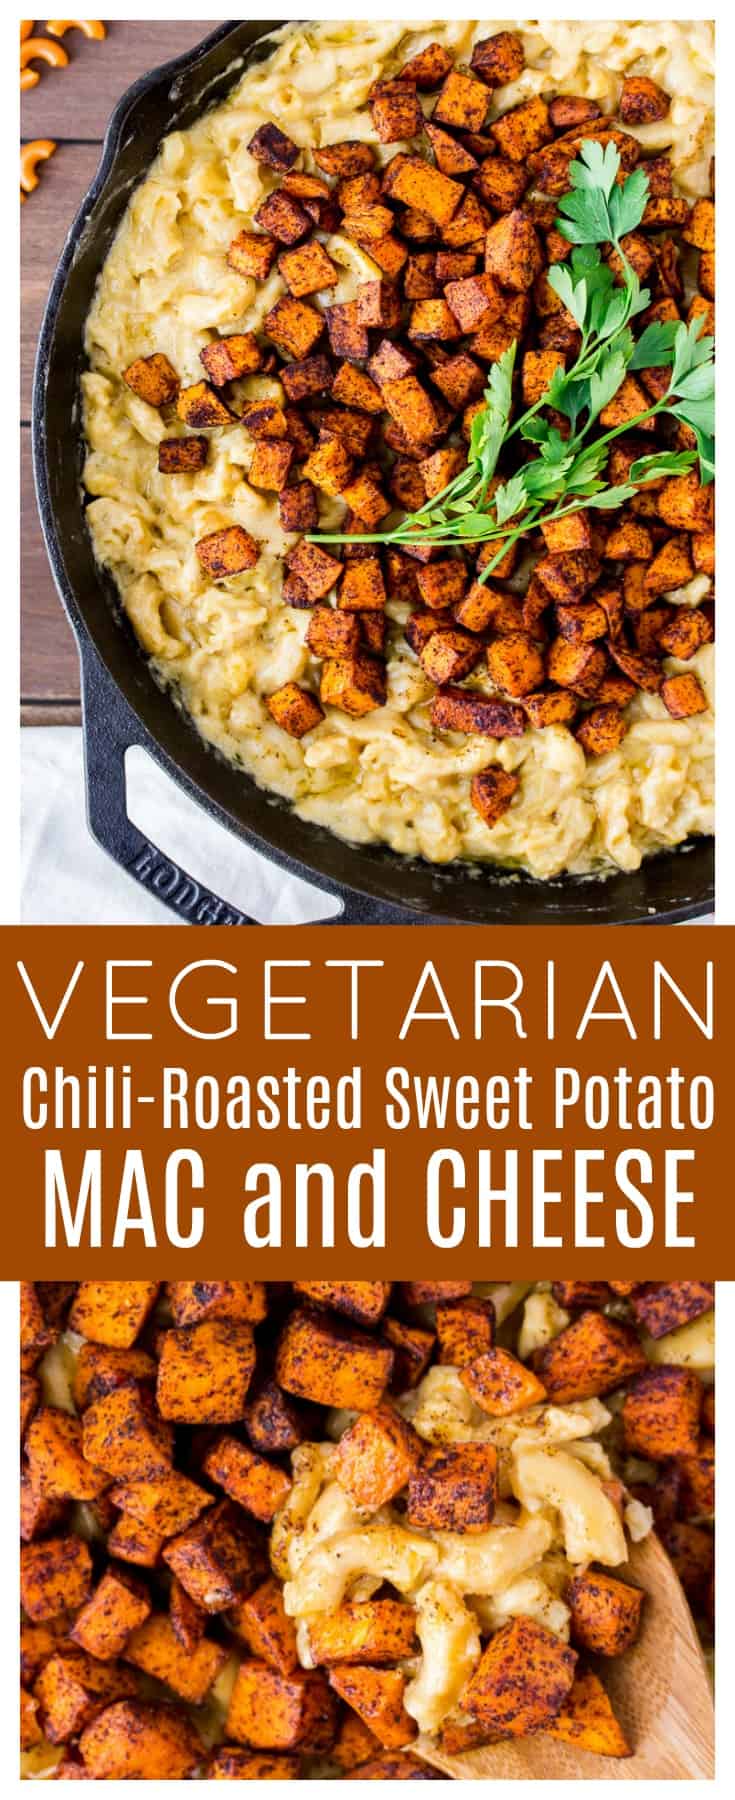 Chili-Roasted Sweet Potato Mac and Cheese - a classic cheddar macaroni and cheese recipe topped with chili-roasted sweet potatoes for a unique, delicious meal! It's sweet, spicy, and cheesy - a delicious comfort food recipe for fall! | #ad #dlbrecipes #chilimac #sweetpotatomacandcheese #macandcheese